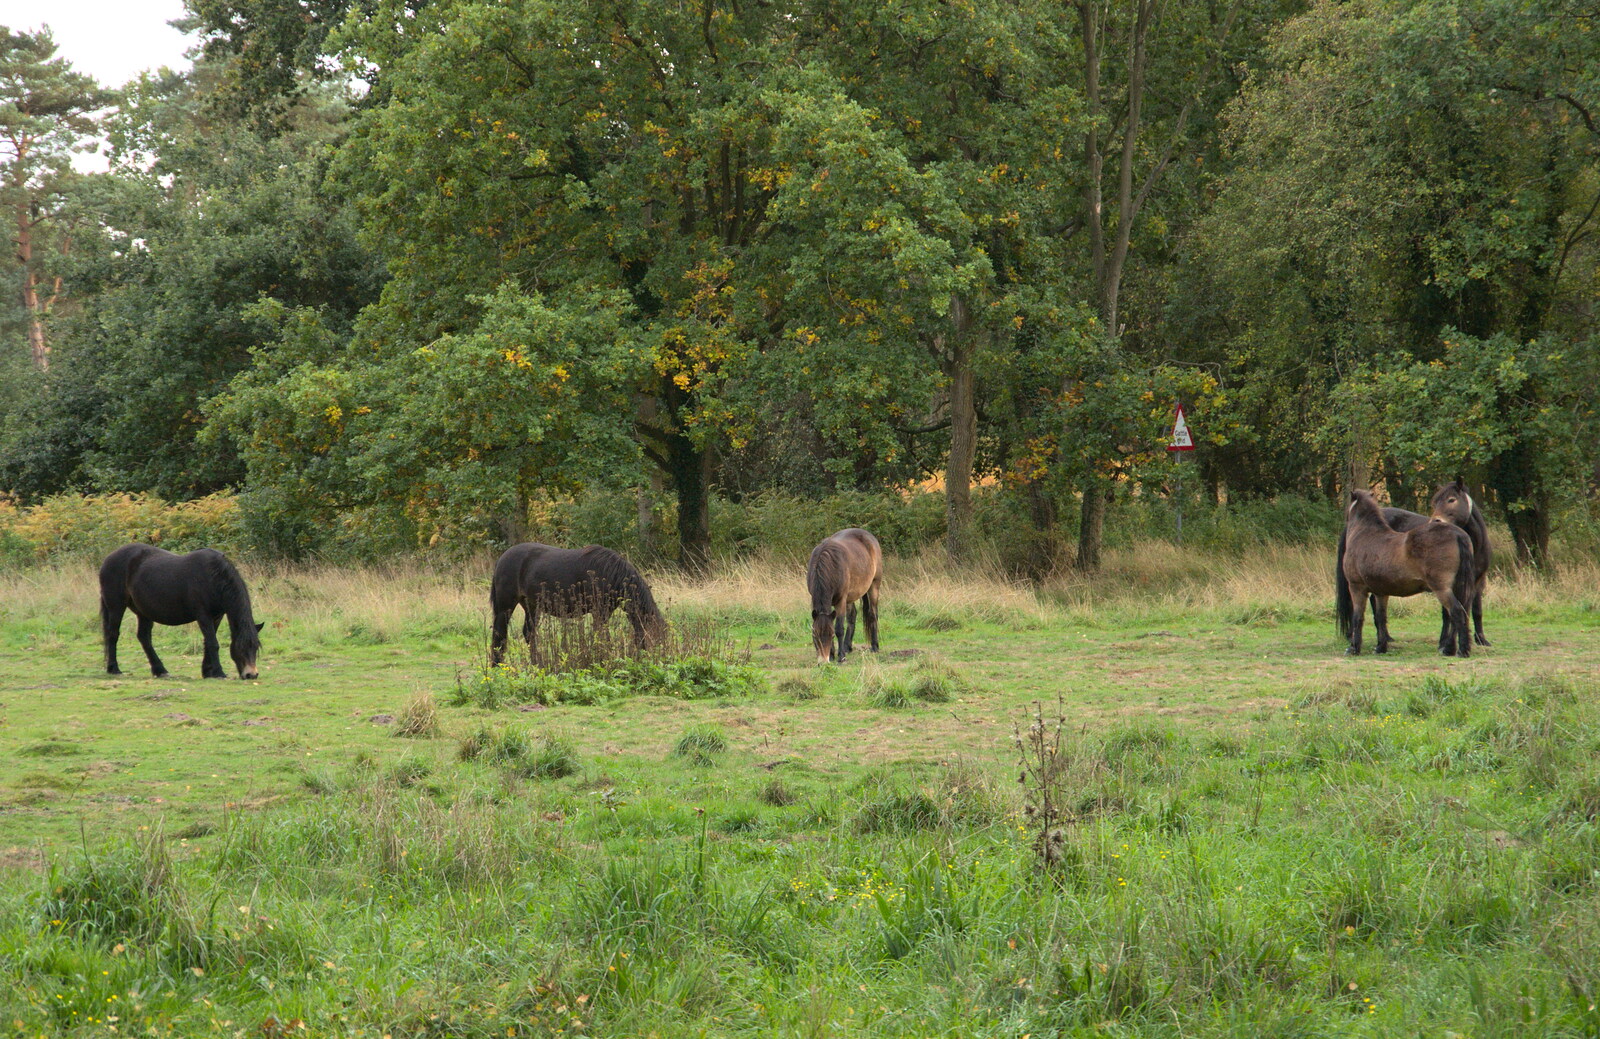 Grazing ponies from Evidence of Autumn: Geocaching on Knettishall Heath, Suffolk - 7th October 2018